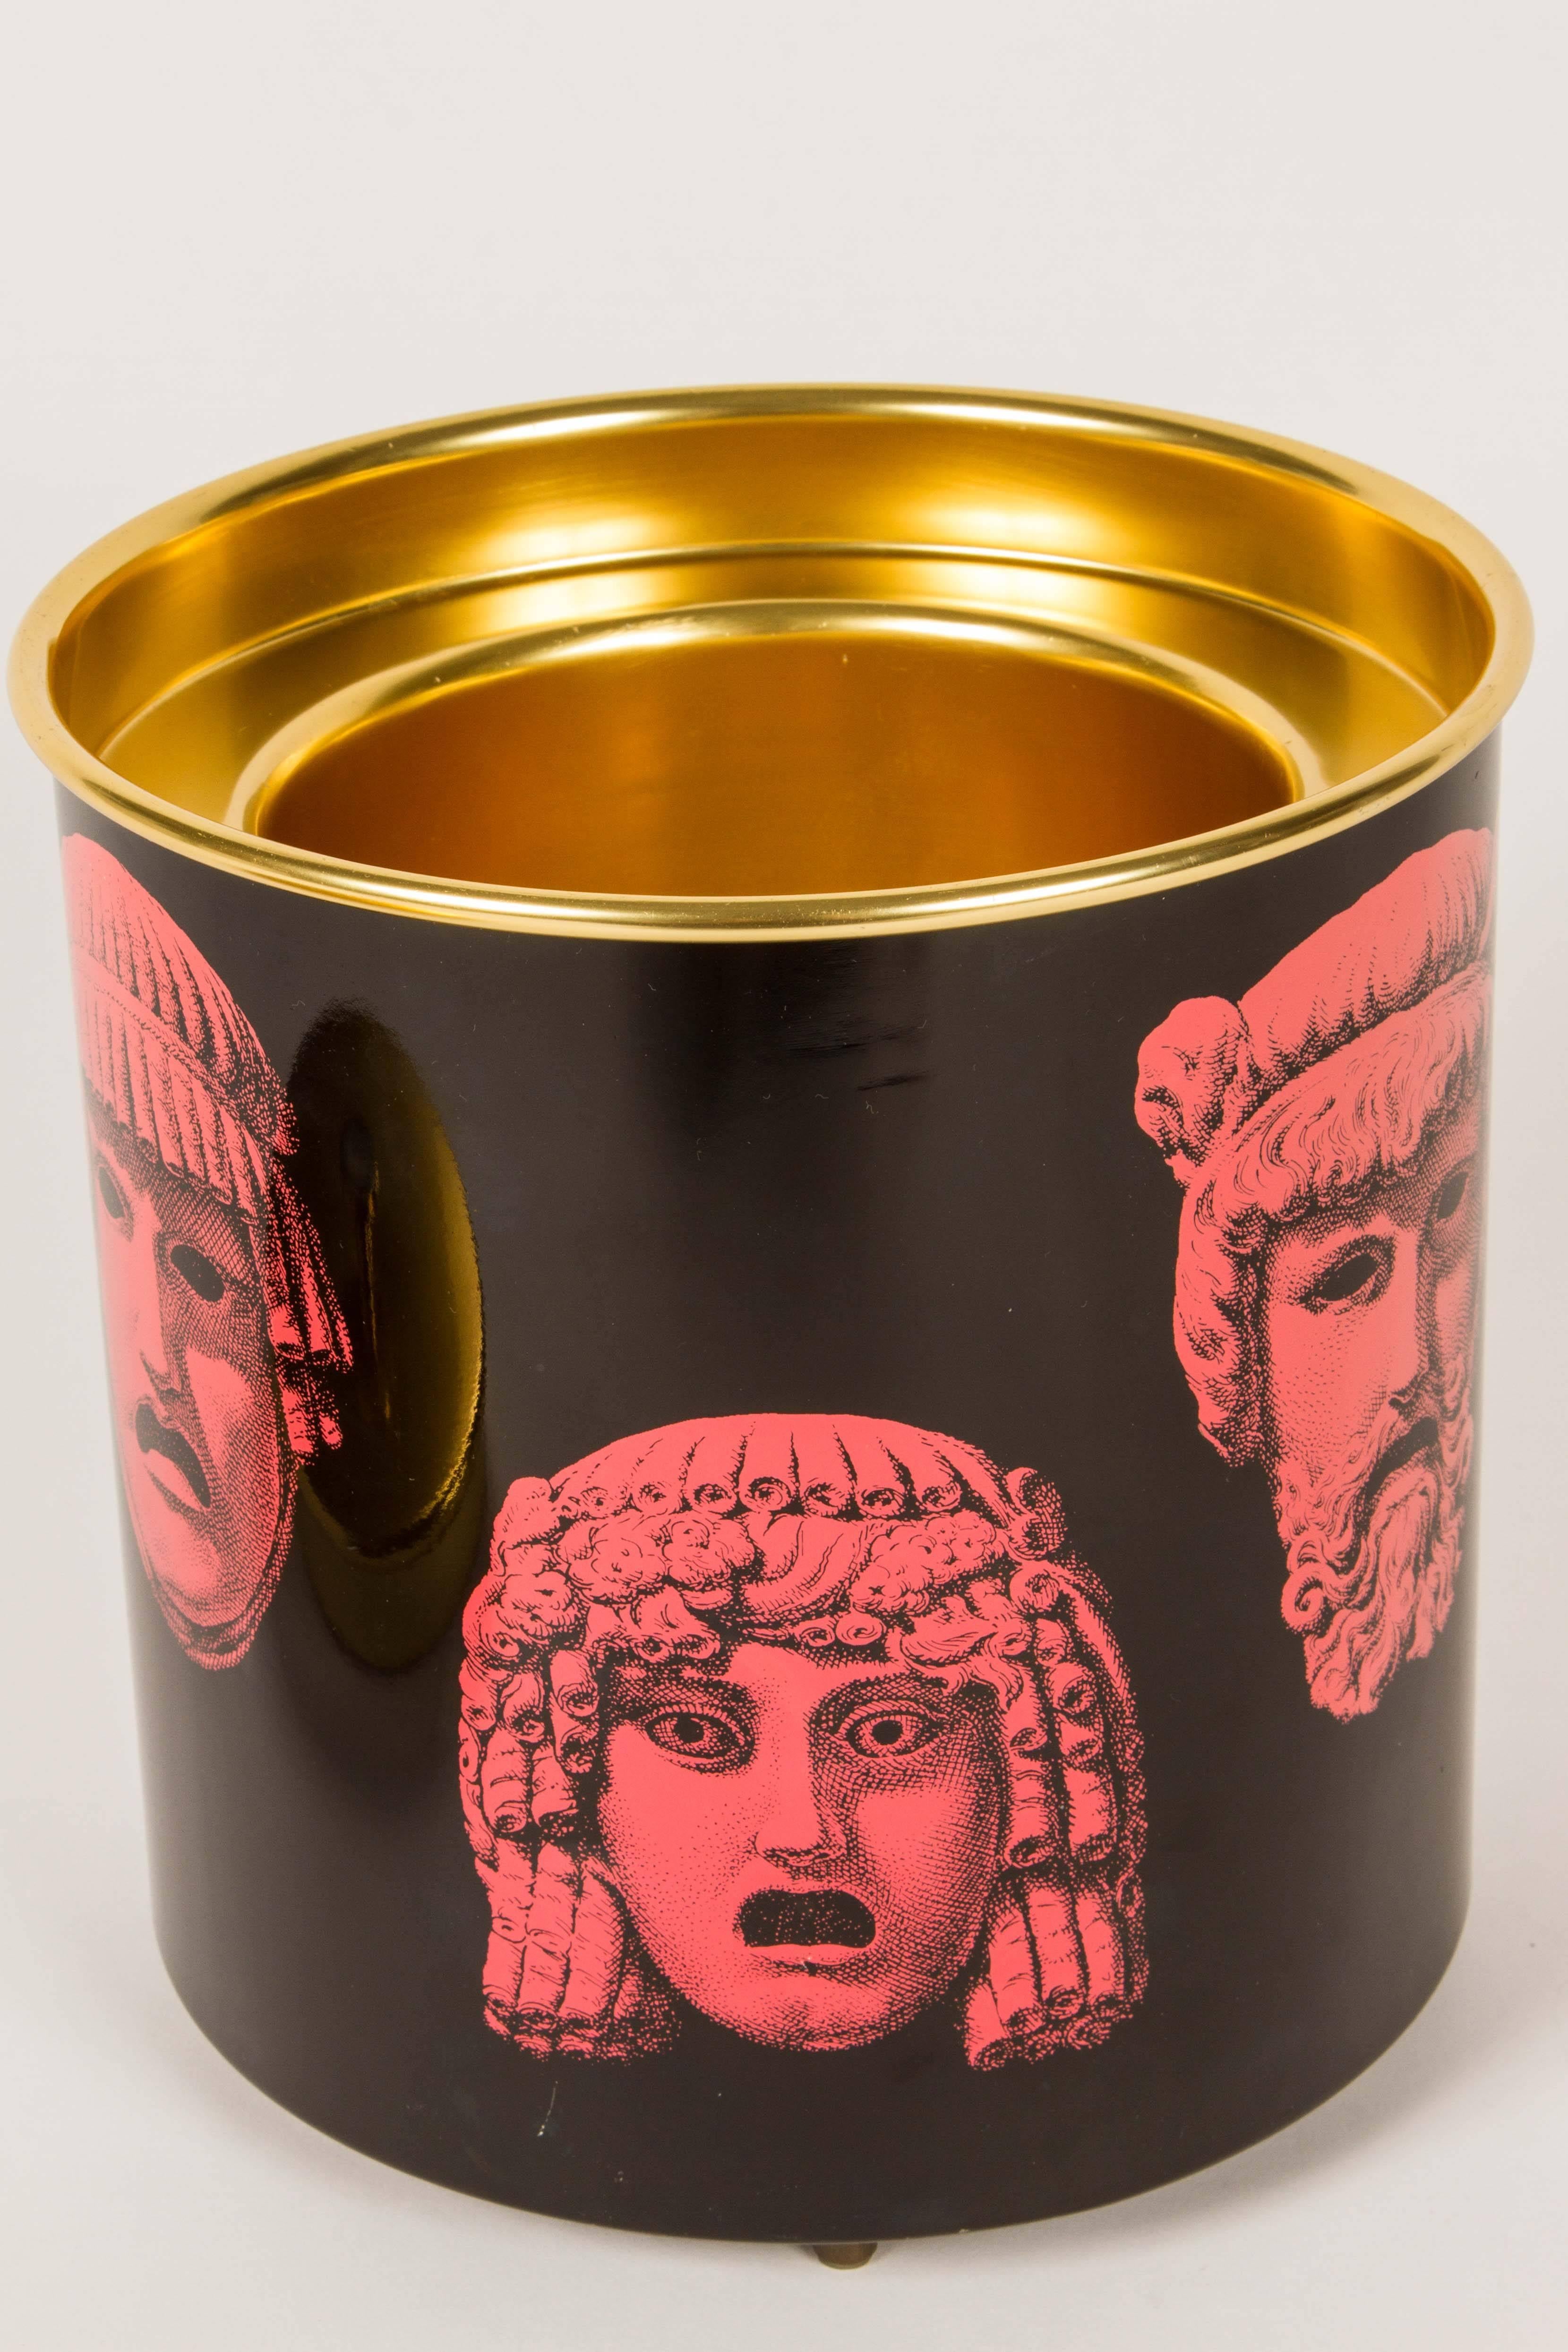 This is a wonderful period ice bucket in a striking combination of black, red and anodized gold lid. The bucket features various Greek or Roman masks. There are the remnants of an original inventory sticker on the side of the bucket as seen in image